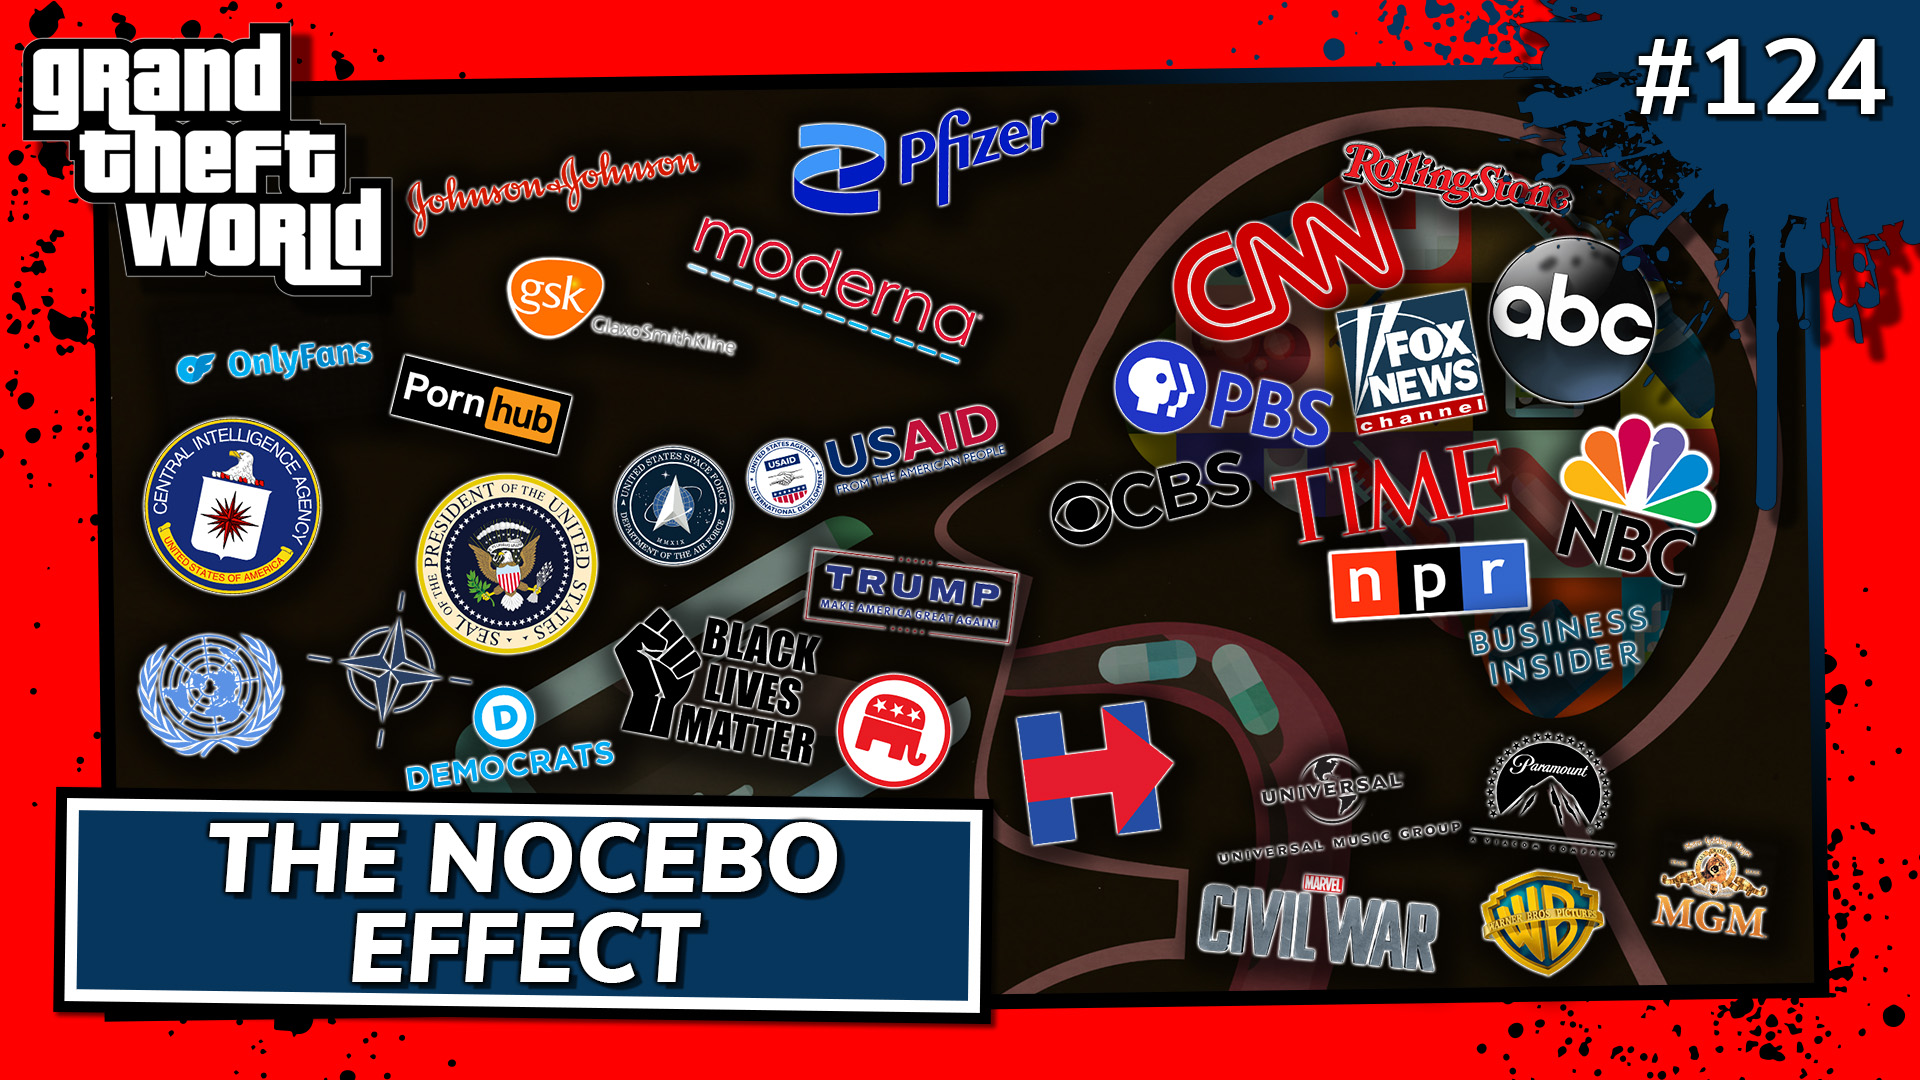 Grand Theft World Podcast 124 | The Nocebo Effect